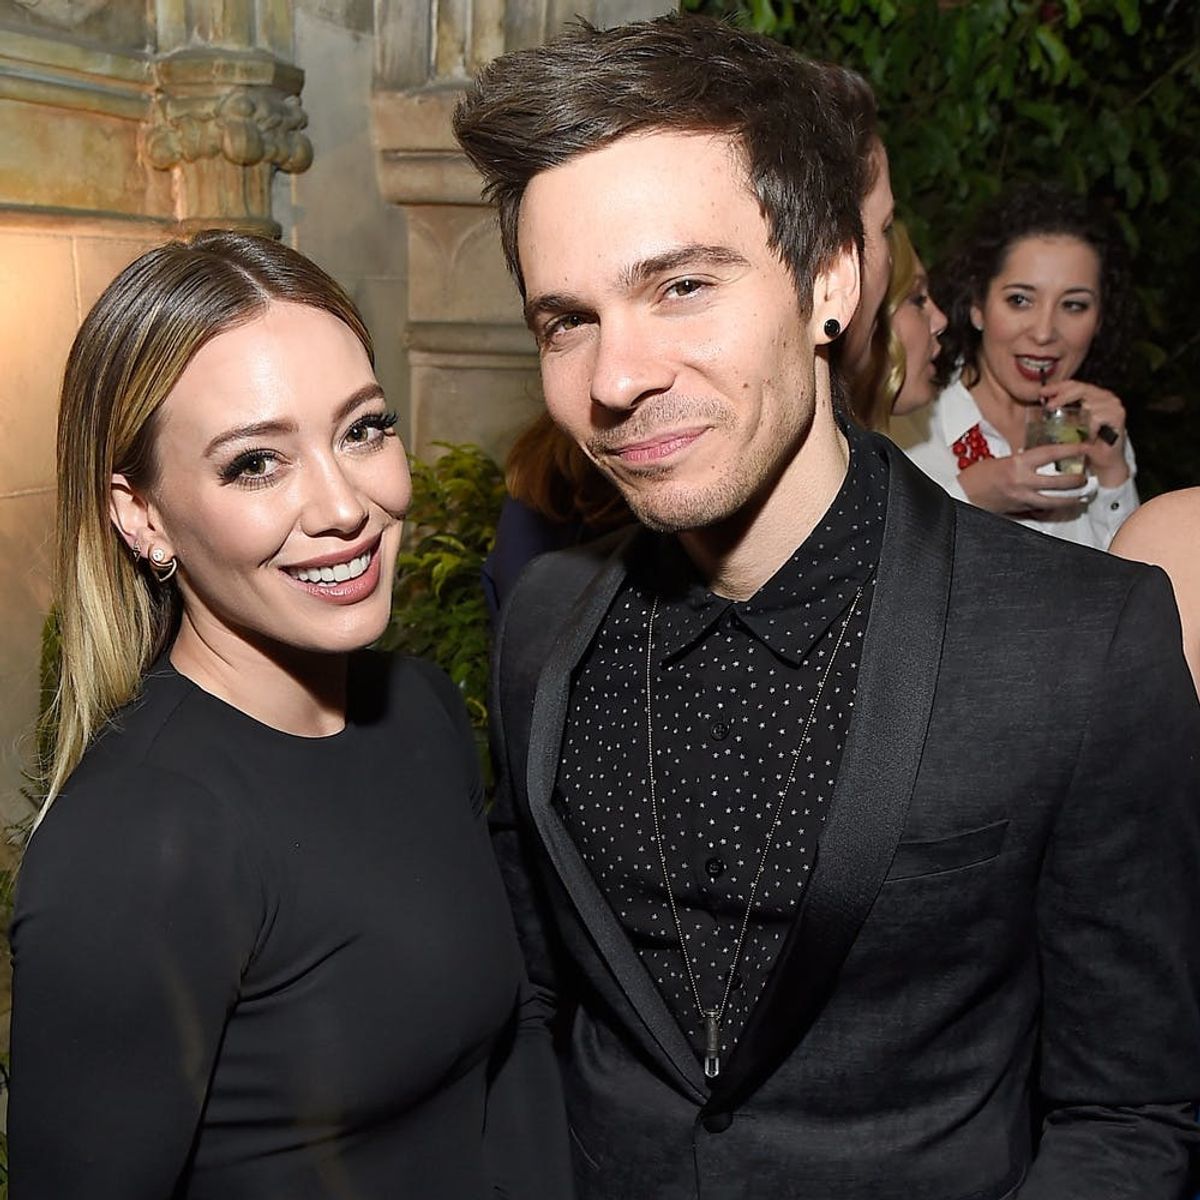 Hilary Duff Confirms She’s Back With Ex Matthew Koma: “Third Time’s a Charm!”